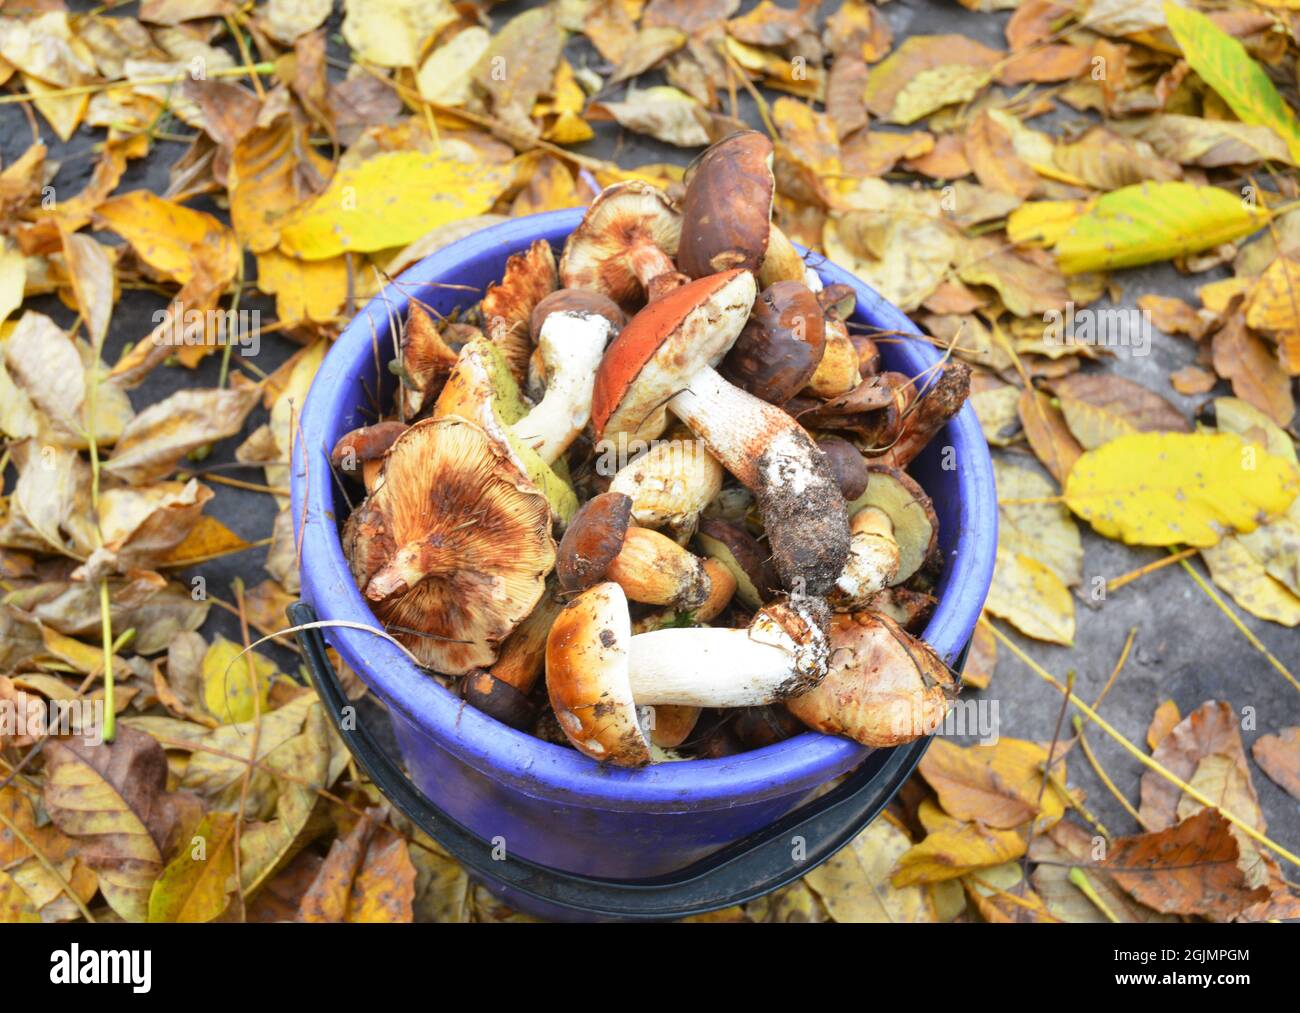 Gathering  wild mushrooms in the bucket. Suillus is a genus of basidiomycete fungi in the family Suillaceae and order Boletales. Mushroom hunting. Stock Photo